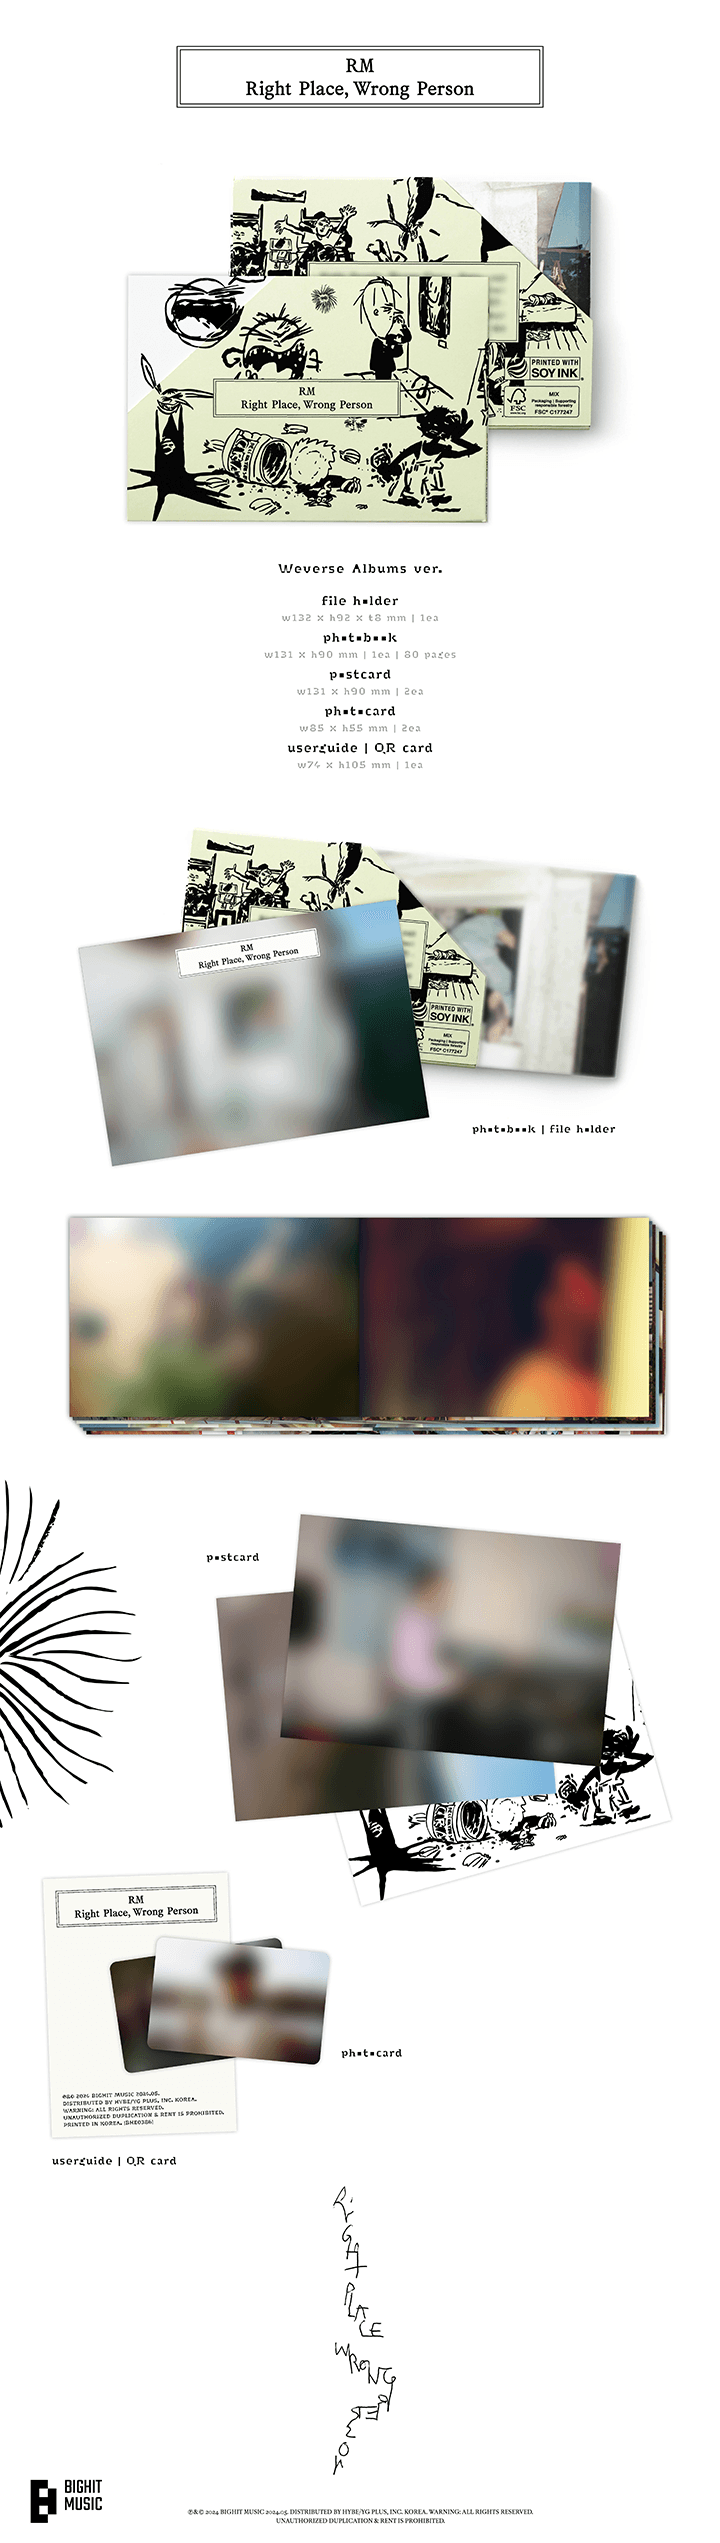 RM - Right Place, Wrong Person (2nd Album) Albums